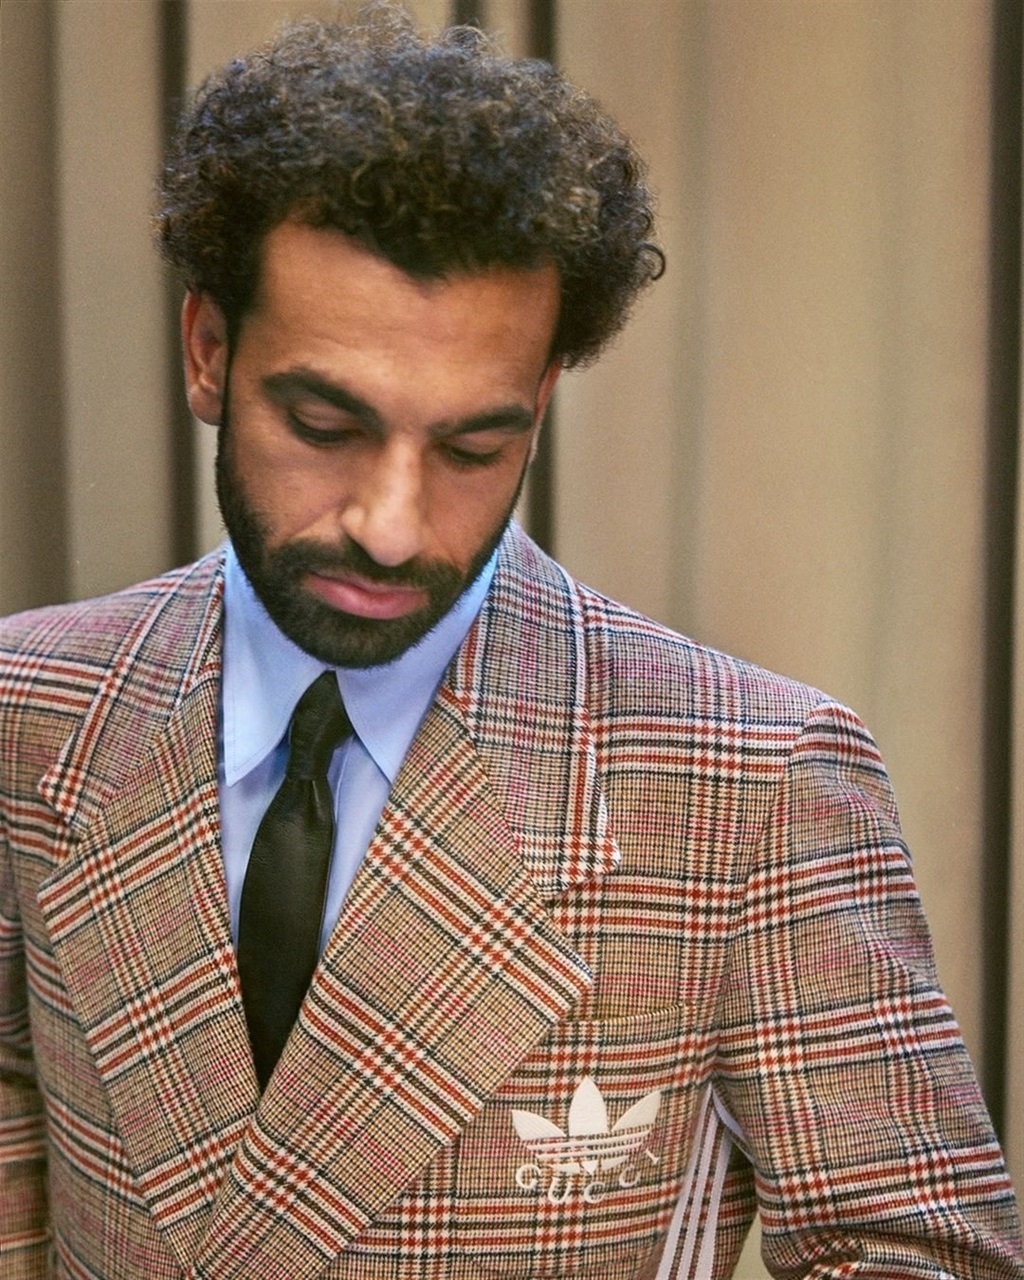 Mo Salah rocking a pricey Gucci suit for his 'A He